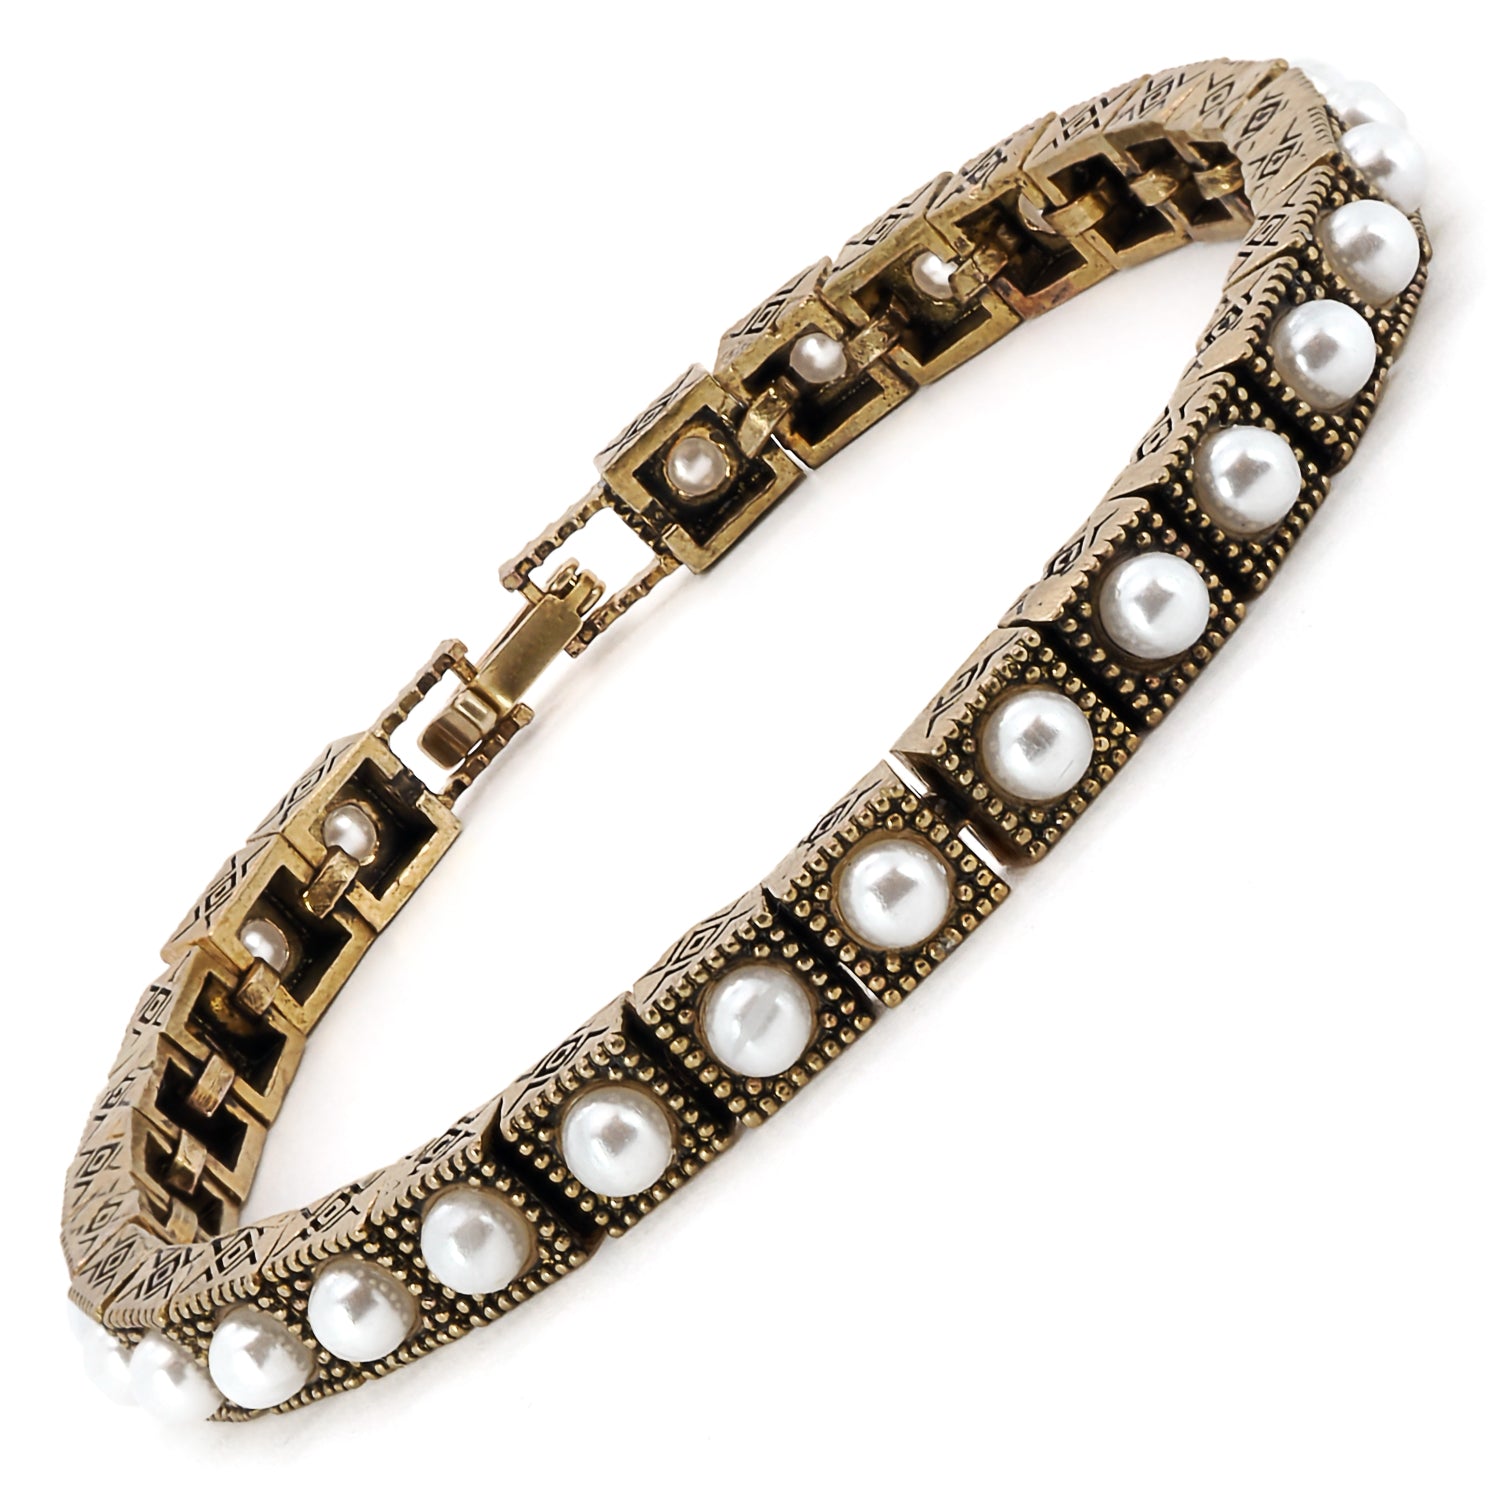 A close-up of the creamy white pearls on the exquisite Pearl Tennis Bracelet.